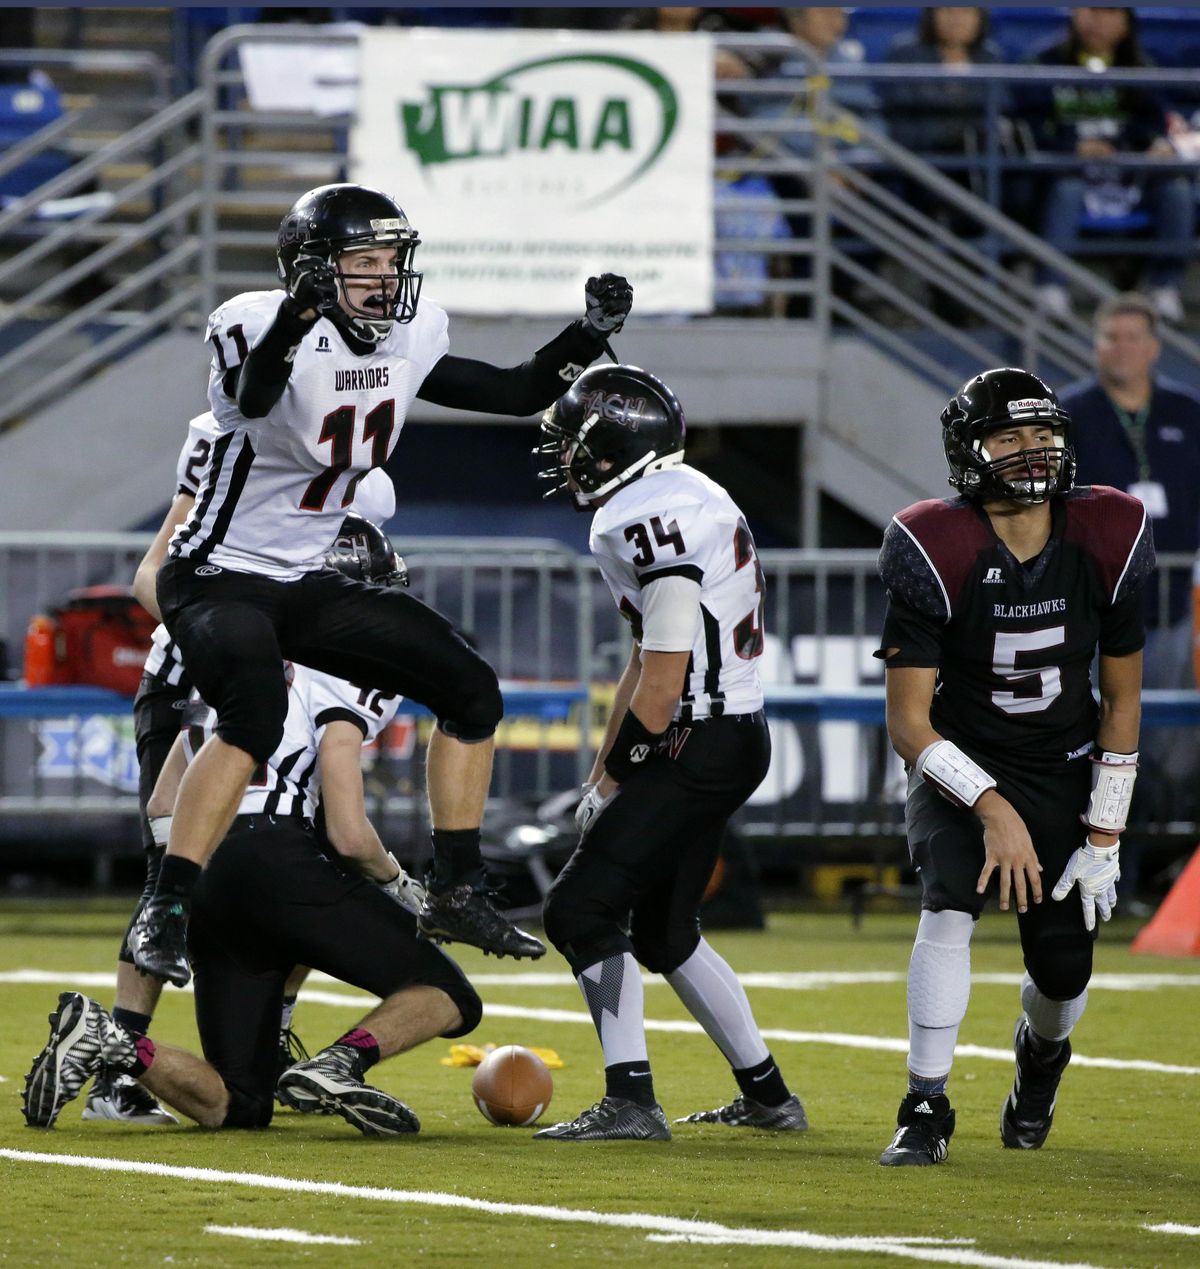 Almira/Coulee-Hartline’s Dallas Isaak (11) celebrates a big play during Friday’s State 1B title game against Lummi Nation.